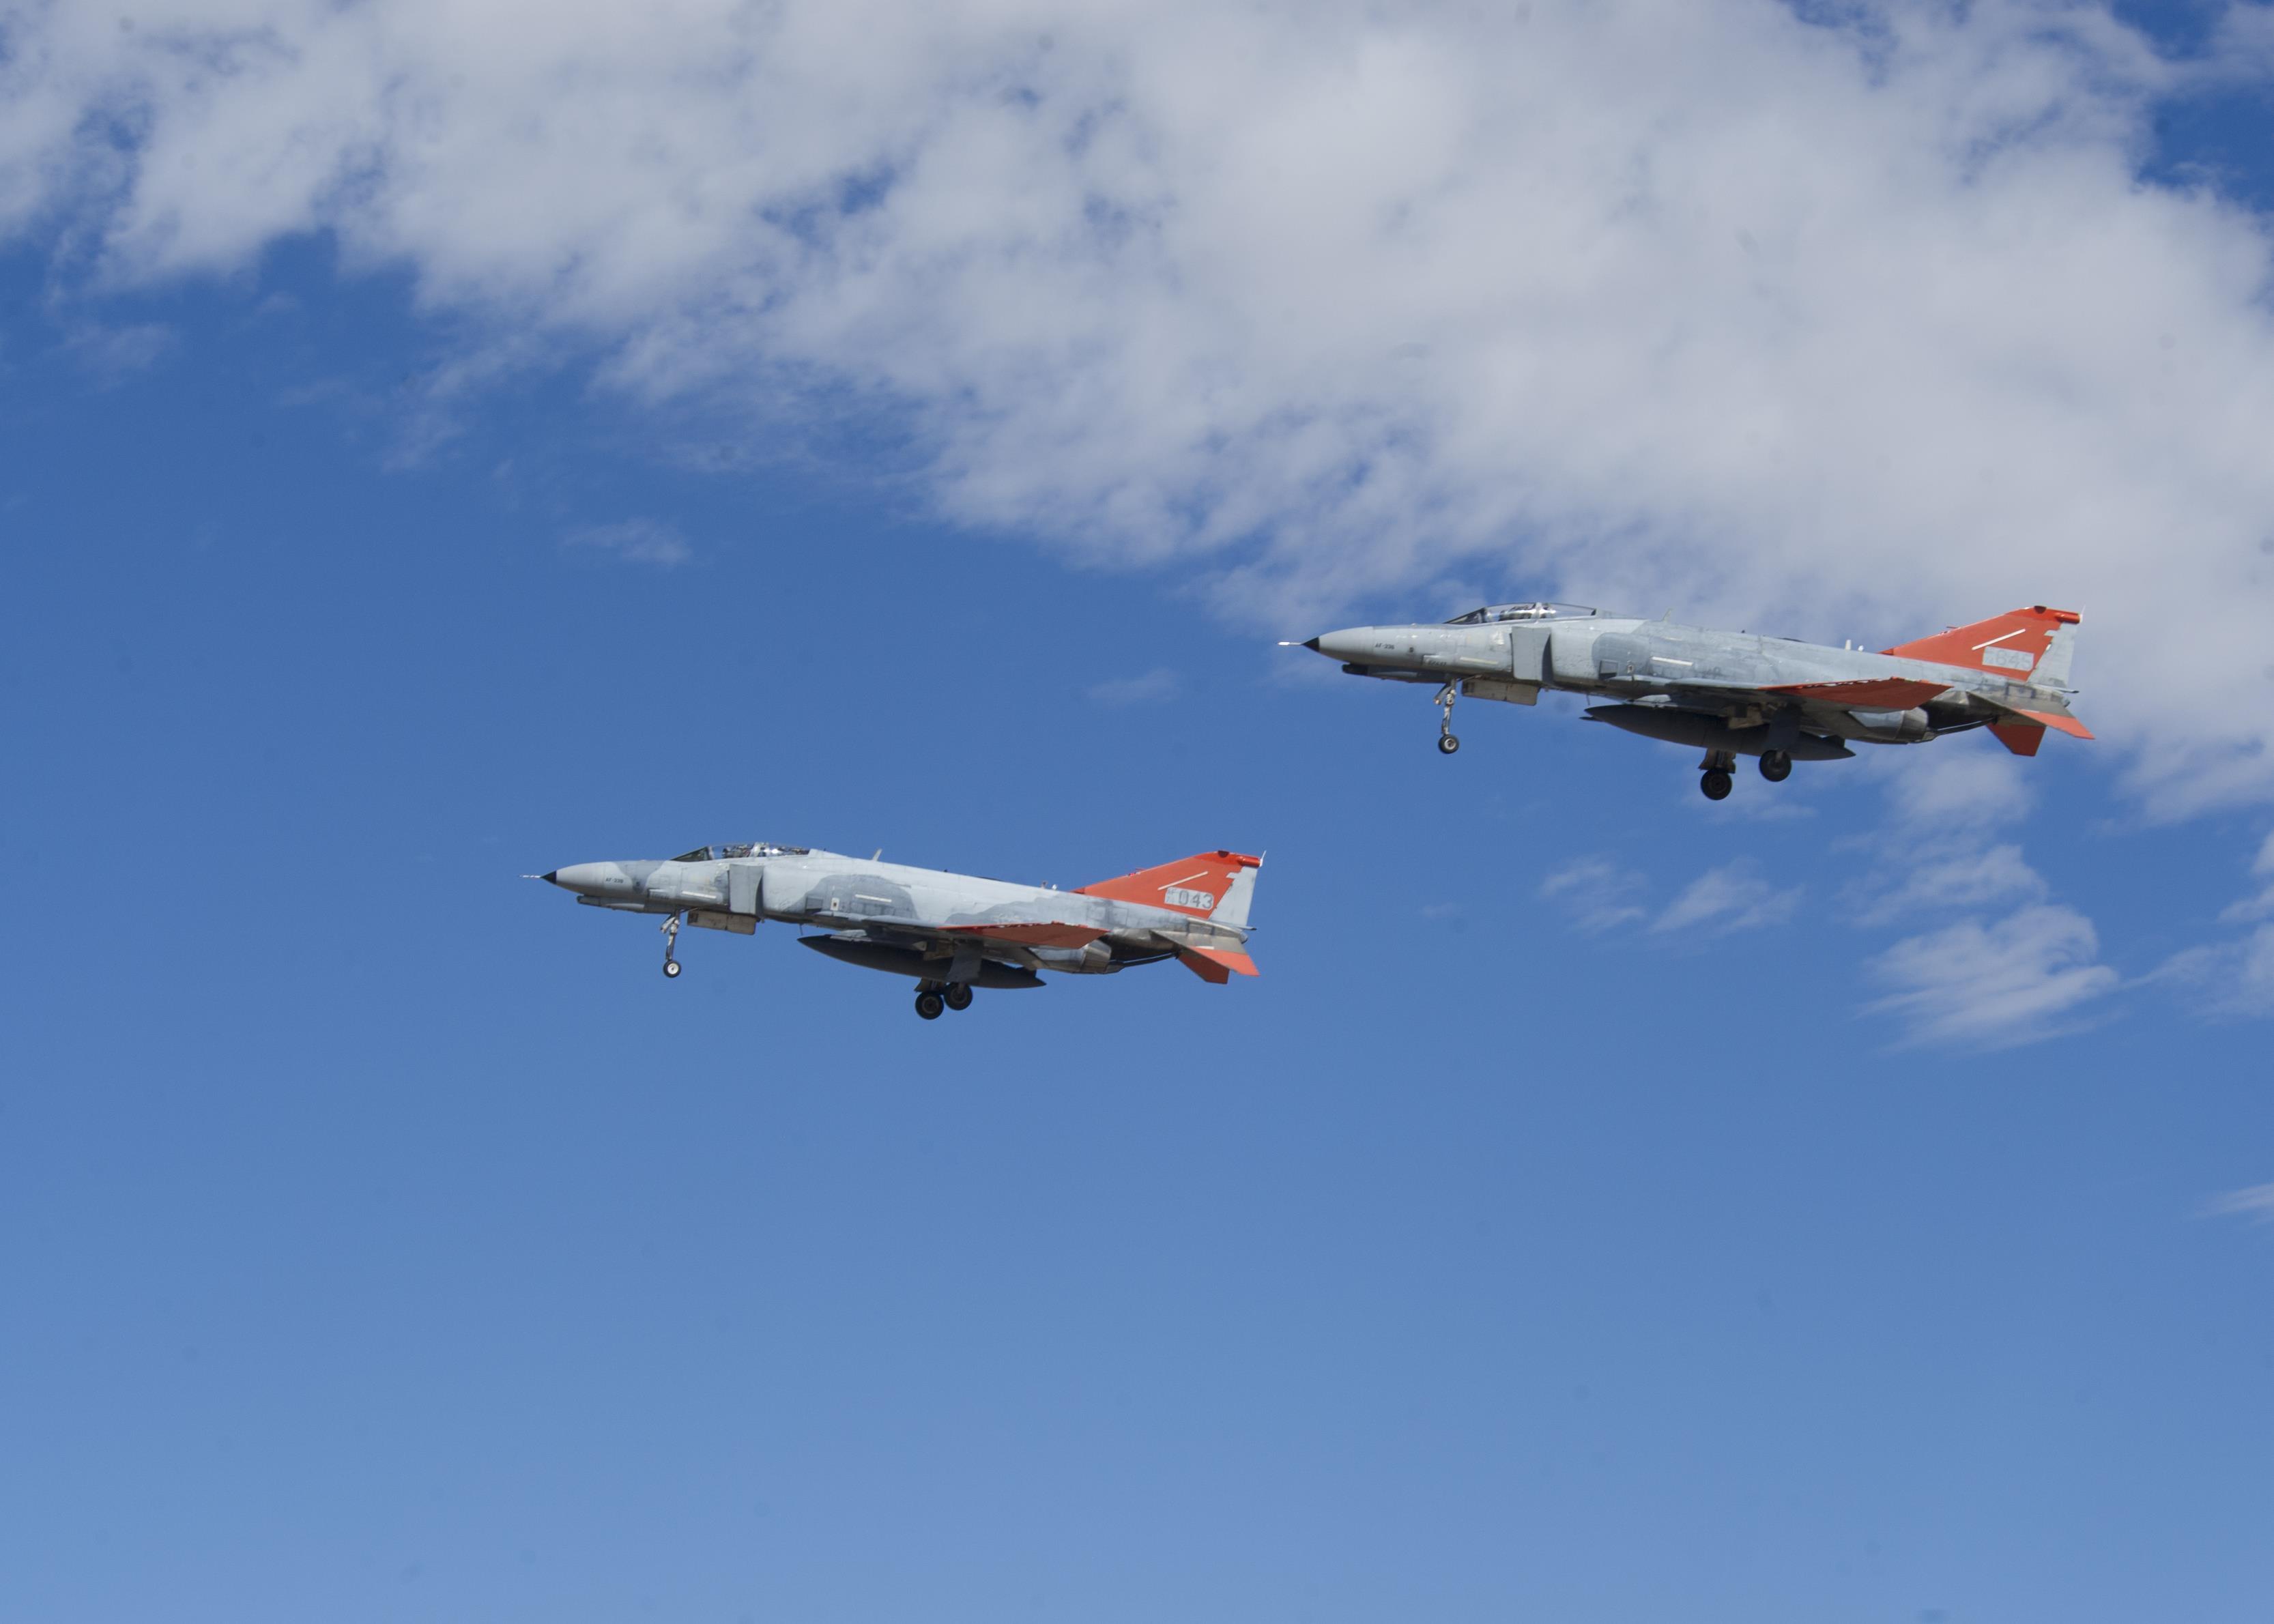 Two QF-4 Phantom IIs fly in formation over Holloman Air Force Base, N.M. on Sept. 13, 2016, in front of 160 spectators participating in Holloman’s annual Phantom Society Tour. The tour enabled aircraft enthusiasts, including veterans and non-veterans with aviation backgrounds, to learn more about Holloman AFB’s aircraft and mission. The tour included an F-16 Fighting Falcon static display and briefing, travel to Holloman’s High Speed Test Track, the opportunity to view QF-4 Phantom IIs and F-16s in flight, and a visit to the base’s heritage park to view static displays of various aircraft historically stationed at Holloman AFB. (U.S. Air Force photo by Master Sgt. Matthew McGovern)